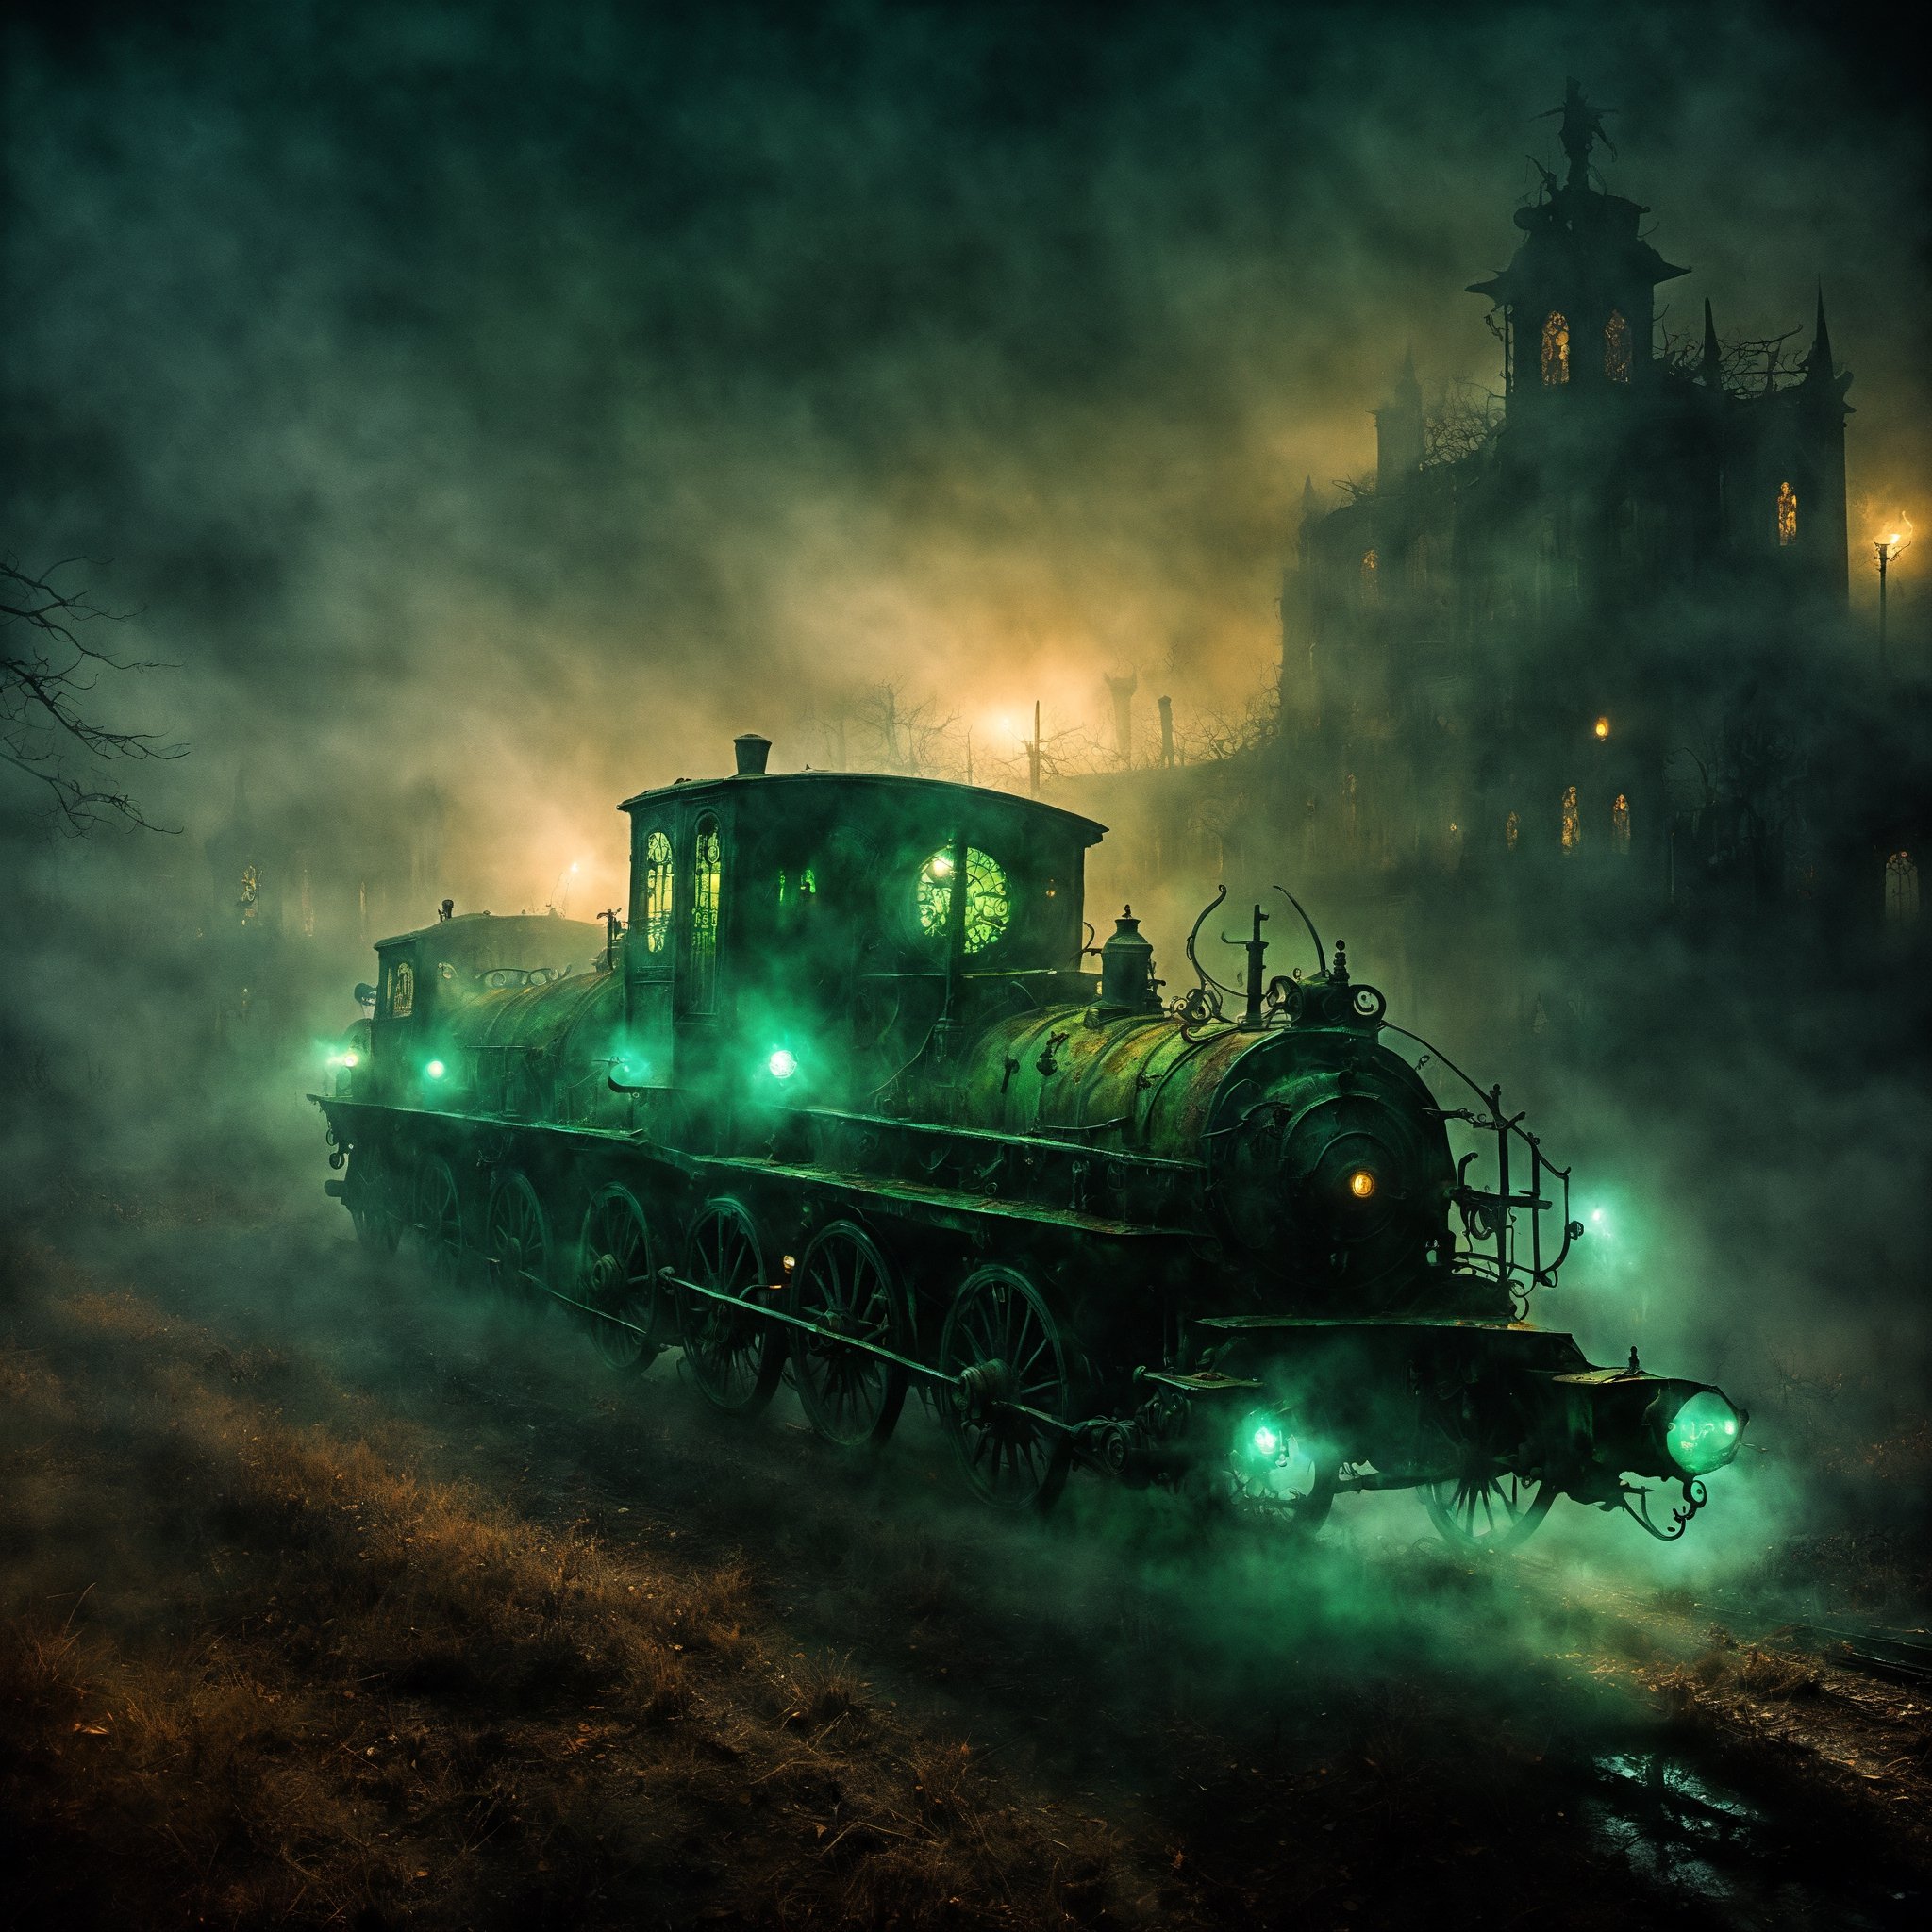 Professional horror concept art, (haunted steam punk ghost train:1.4), rusted and ominous, threading through a desolate, (foggy graveyard at midnight, adorned with ghostly phantasms, spectral figures clinging, eerie green phosphorescence:1.5) haunting spirits swirling around decrepit carriages, H.R. Giger-inspired biomechanical decay, sinister red eyes, (frightening spectral aura:1.3), Guillermo del Toro's macabre and rusted aesthetic, dense mist, chilling, ominous lighting, hyper-detailed, nightmare-inducing, ultra high resolution.